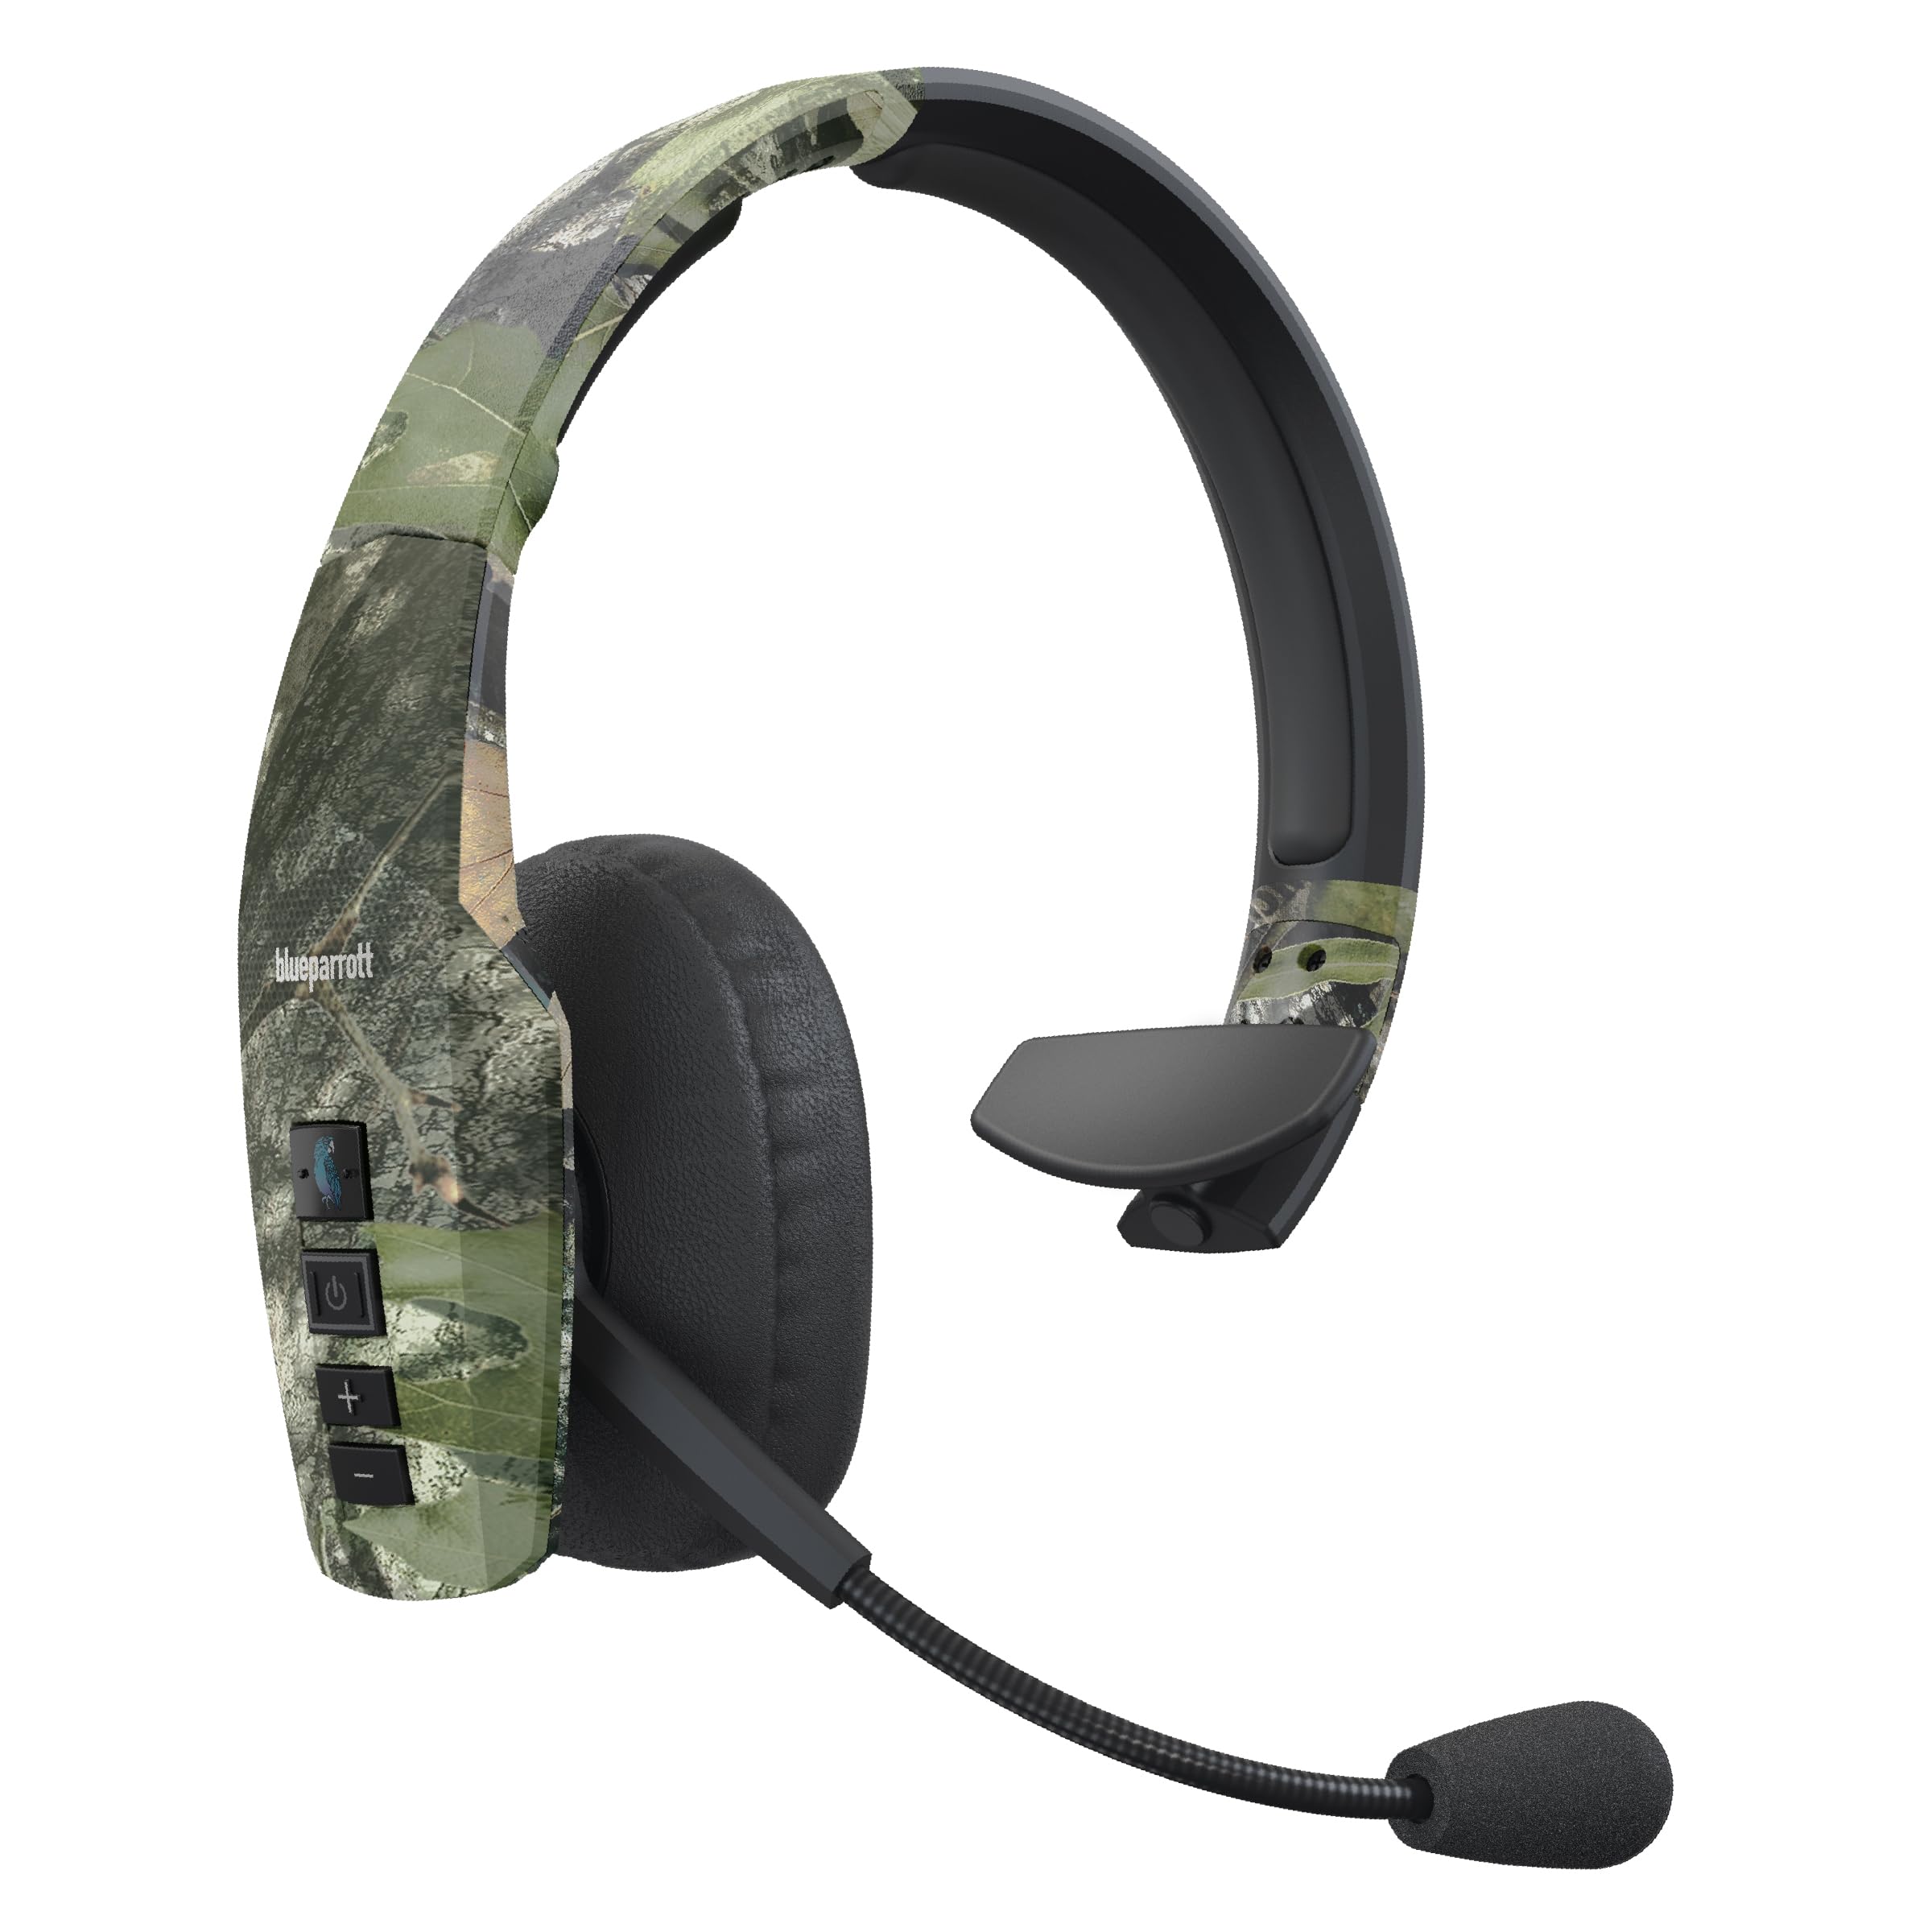 BlueParrott B450-XT Mossy Oak Obsession Edition - Noise Cancelling Bluetooth Wireless Headset – Updated Design with Industry Leading Sound & Improved Comfort, Up to 24 Hours of Talk Time, IP54-Rated